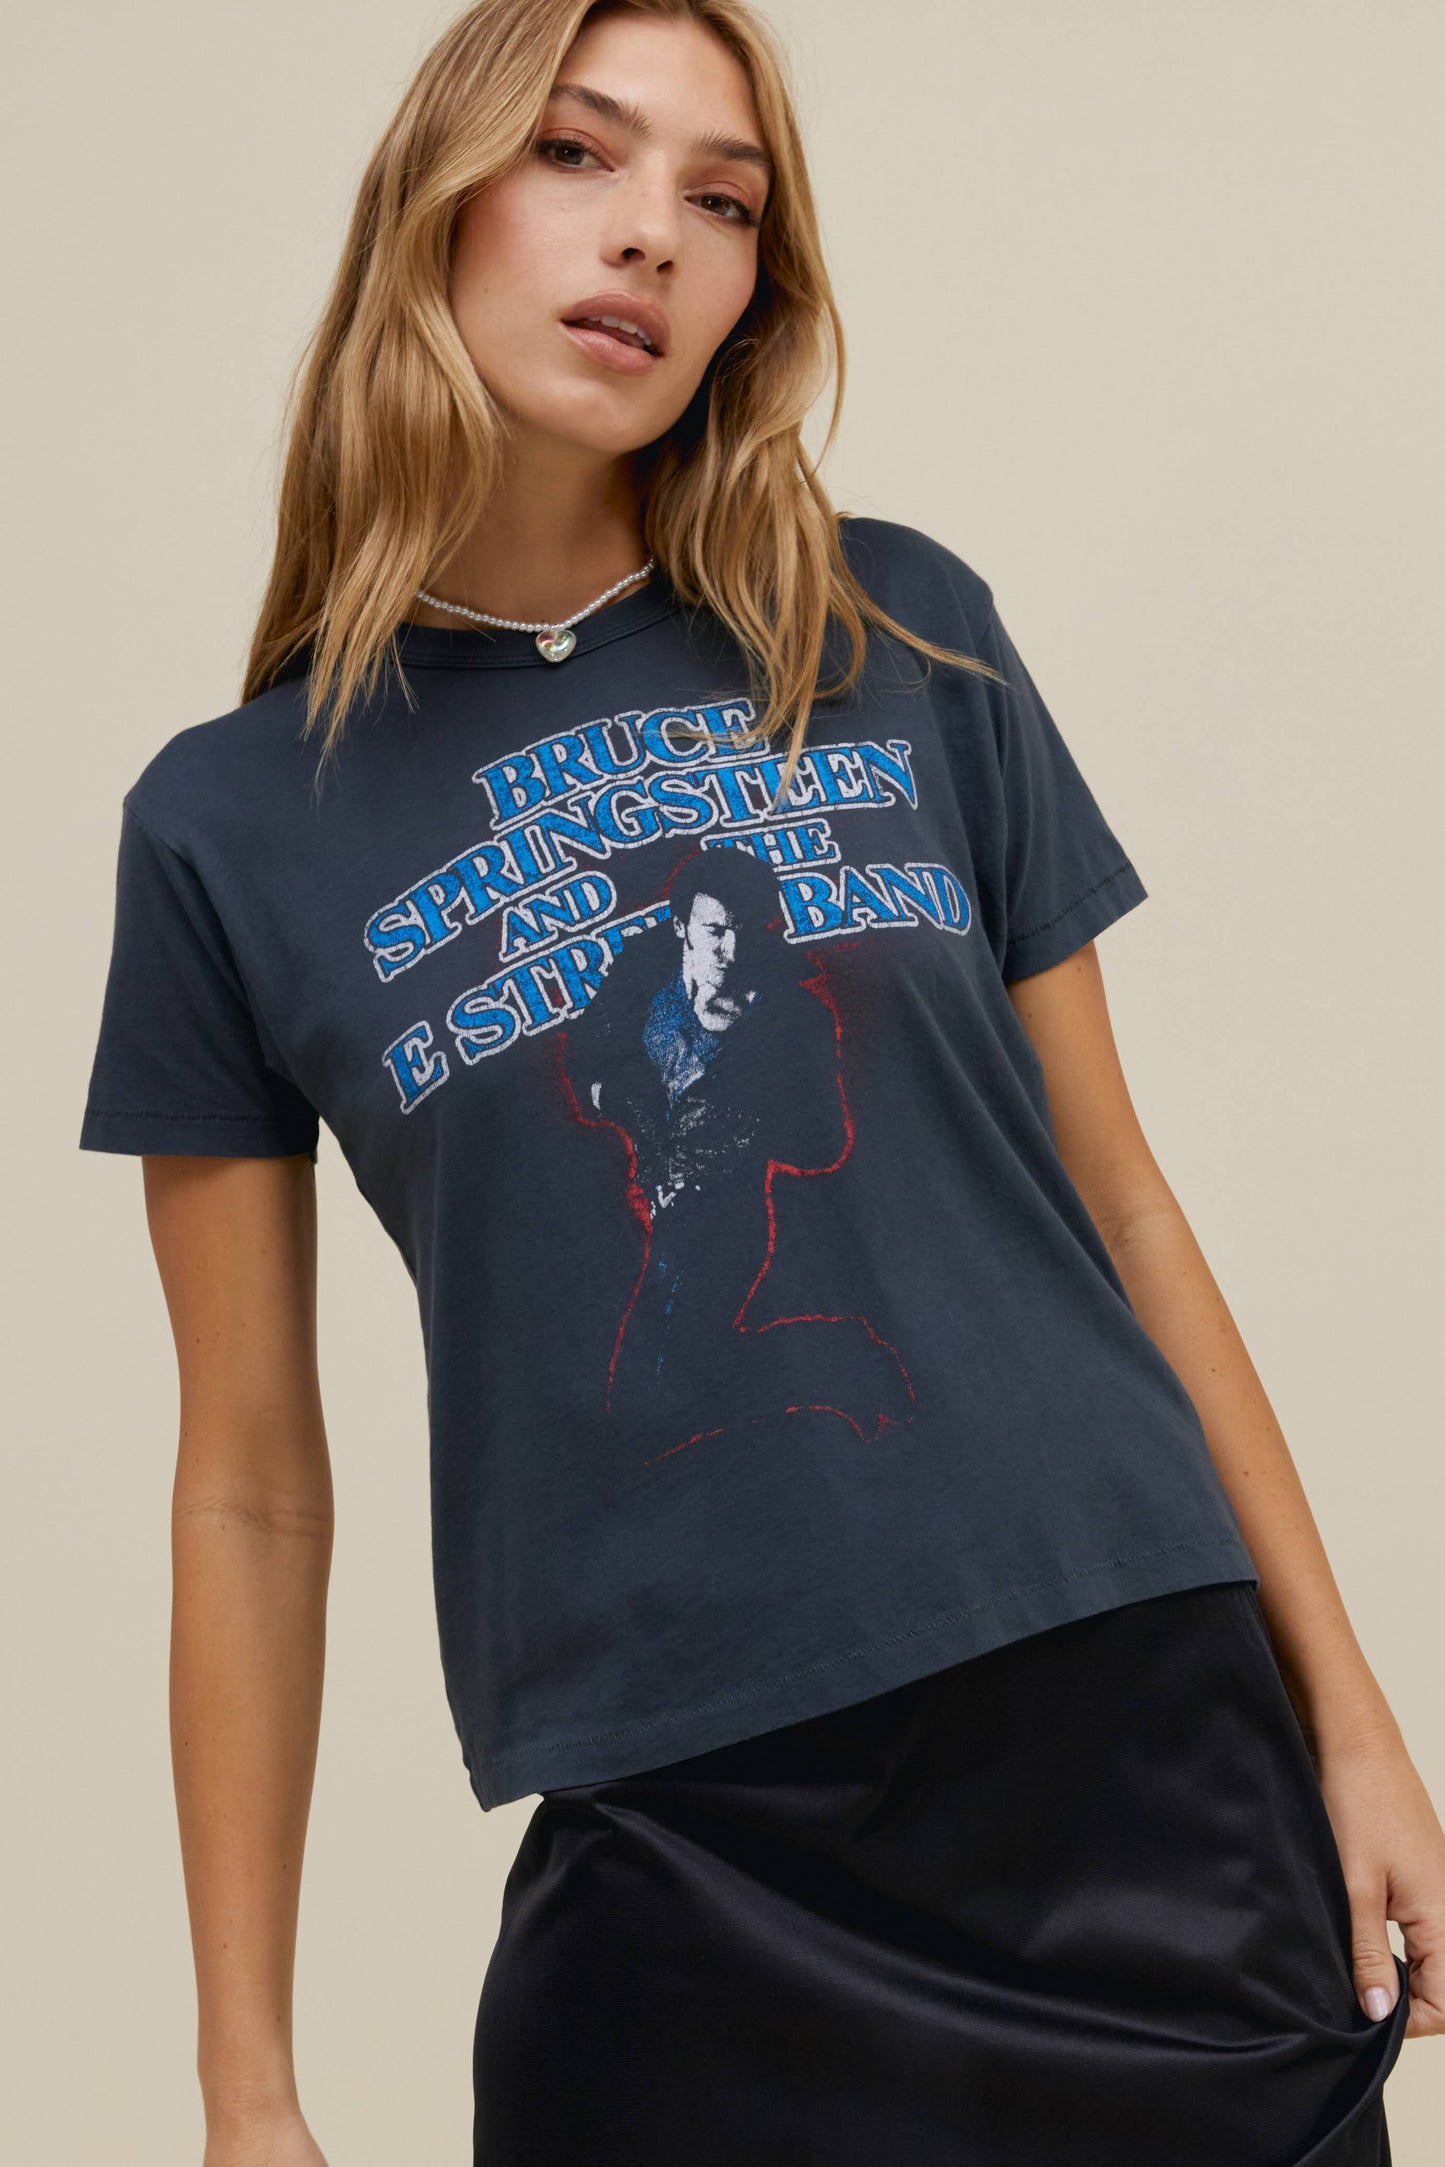 authentic Bruce Springsteen ringer tee